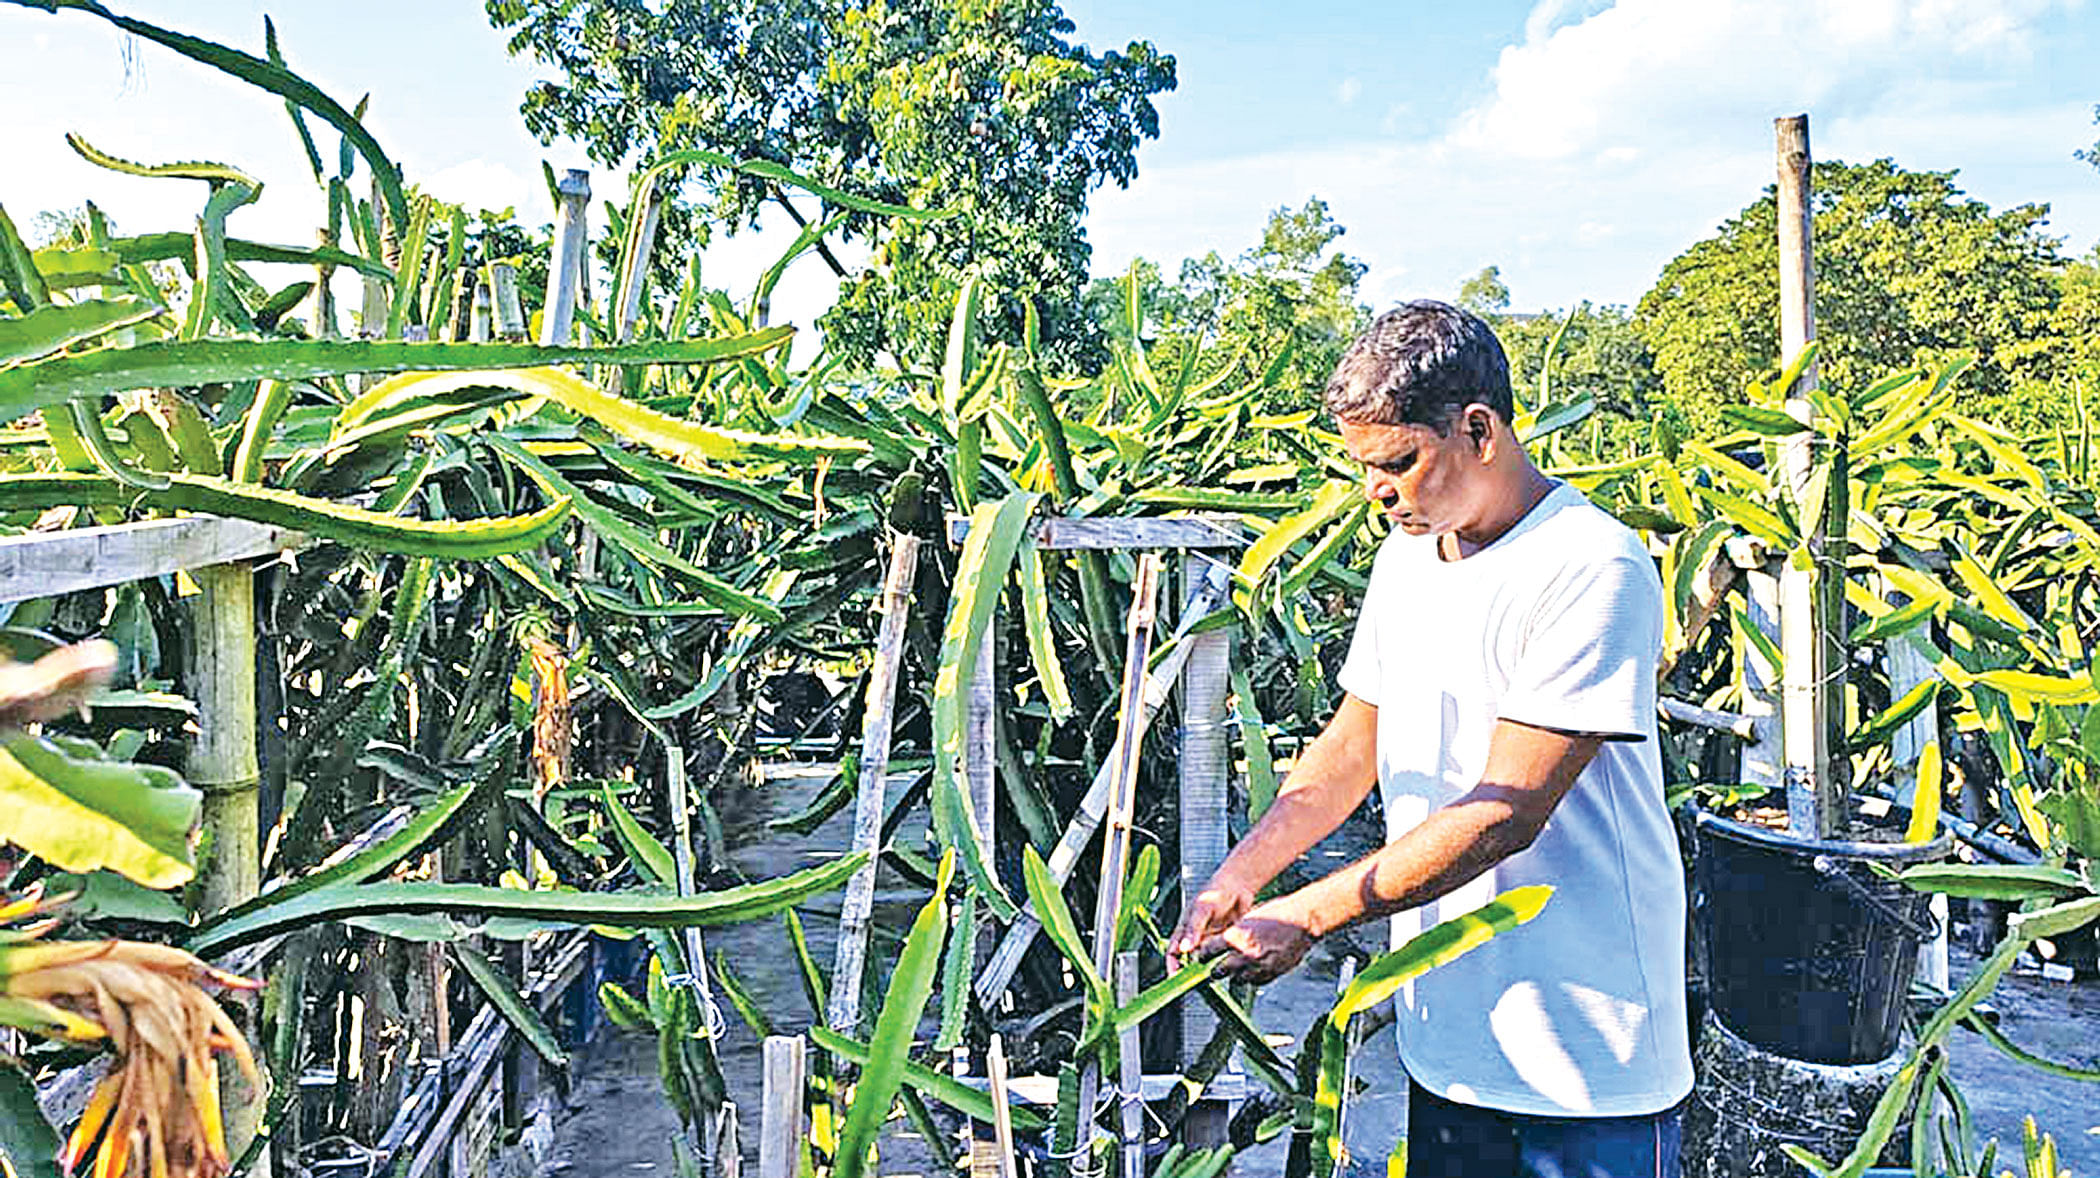 Dragon fruit grower turns house into an orchard The Daily Star photo